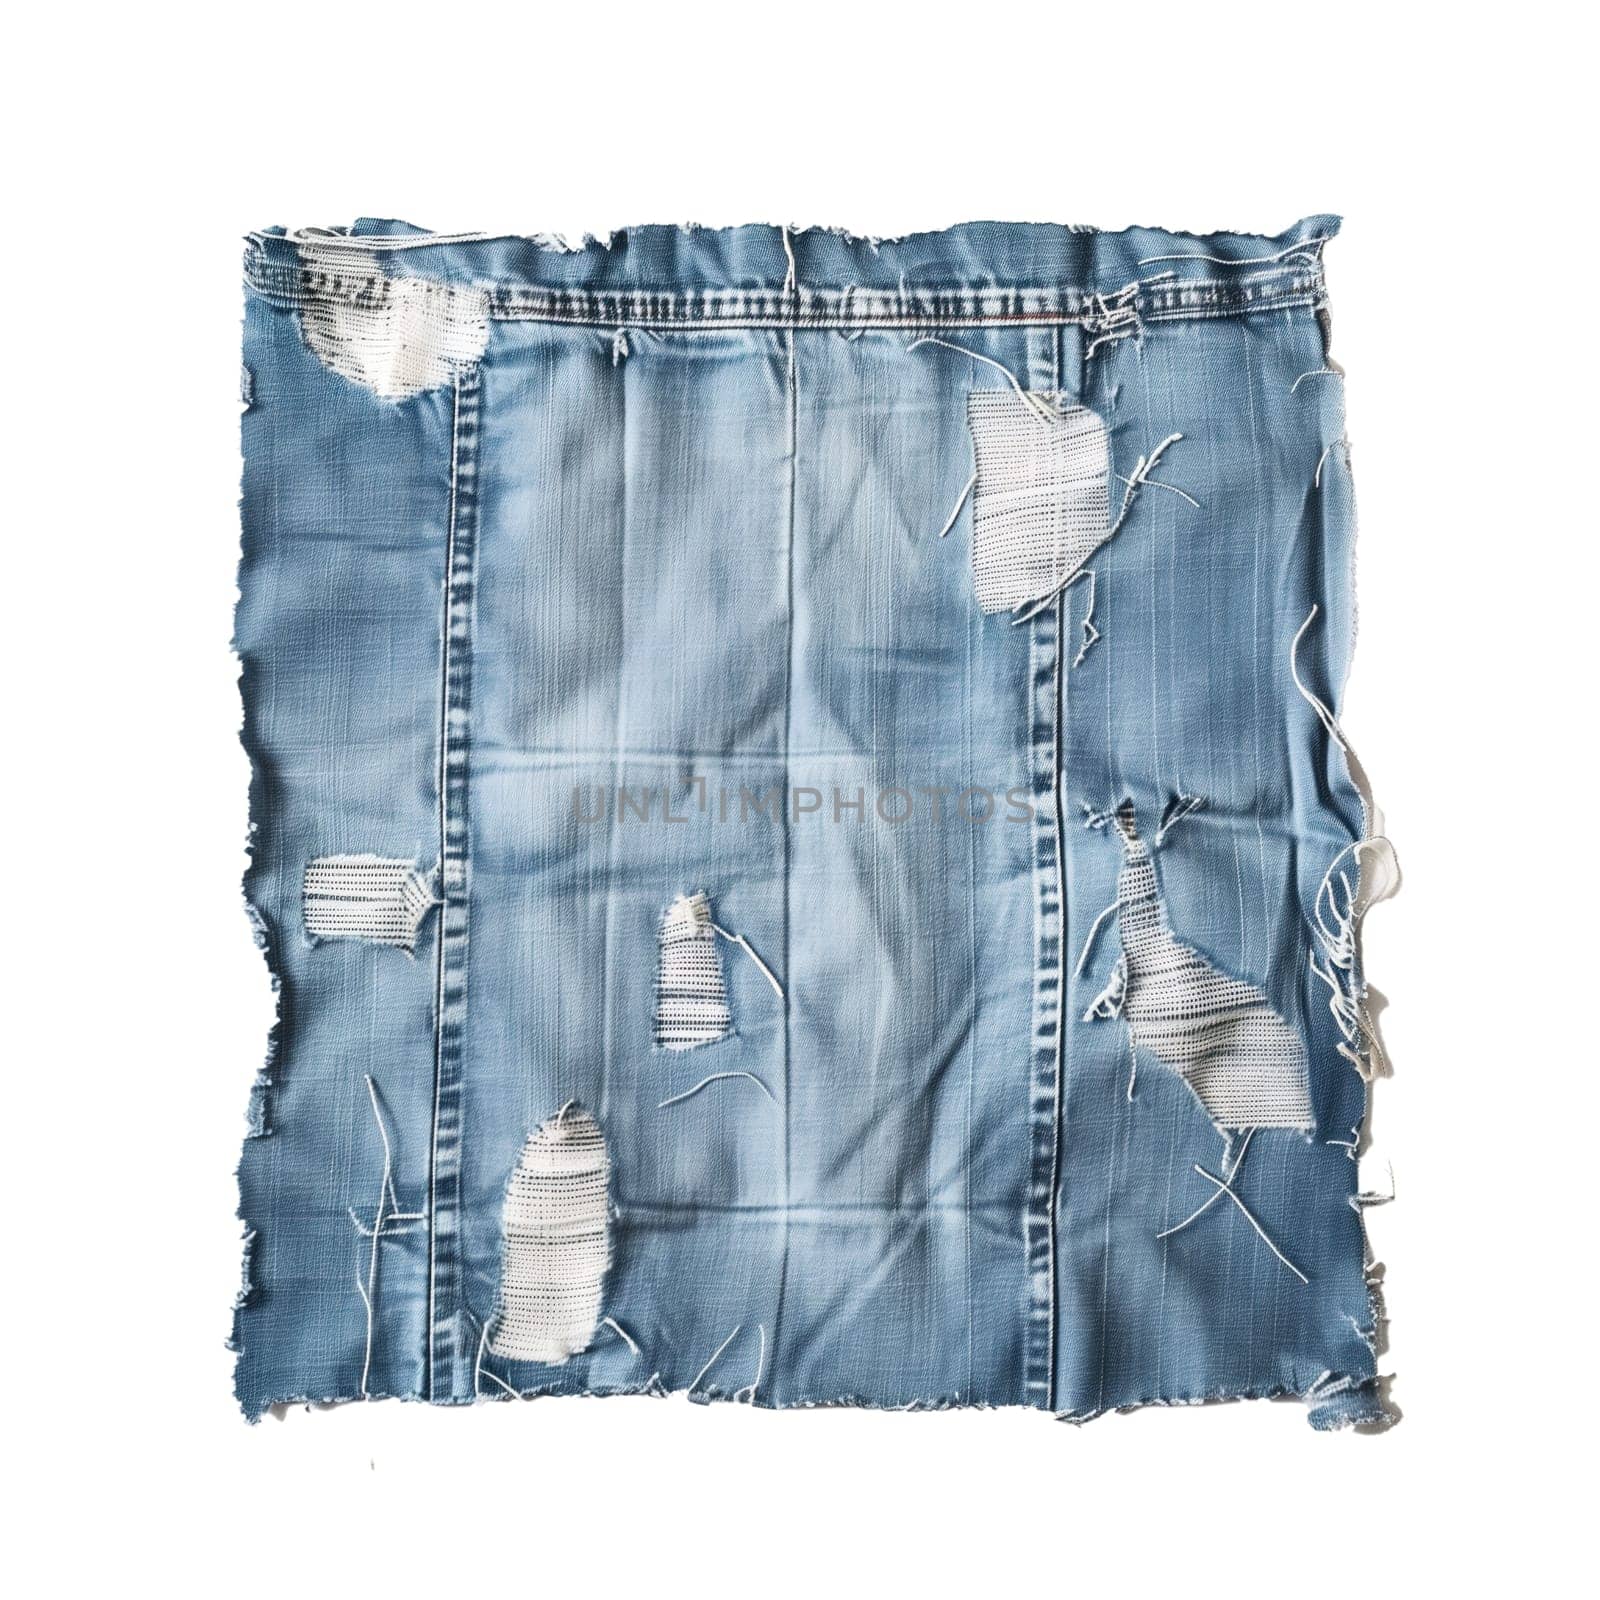 Ragged jeans square cloth piece ai generated